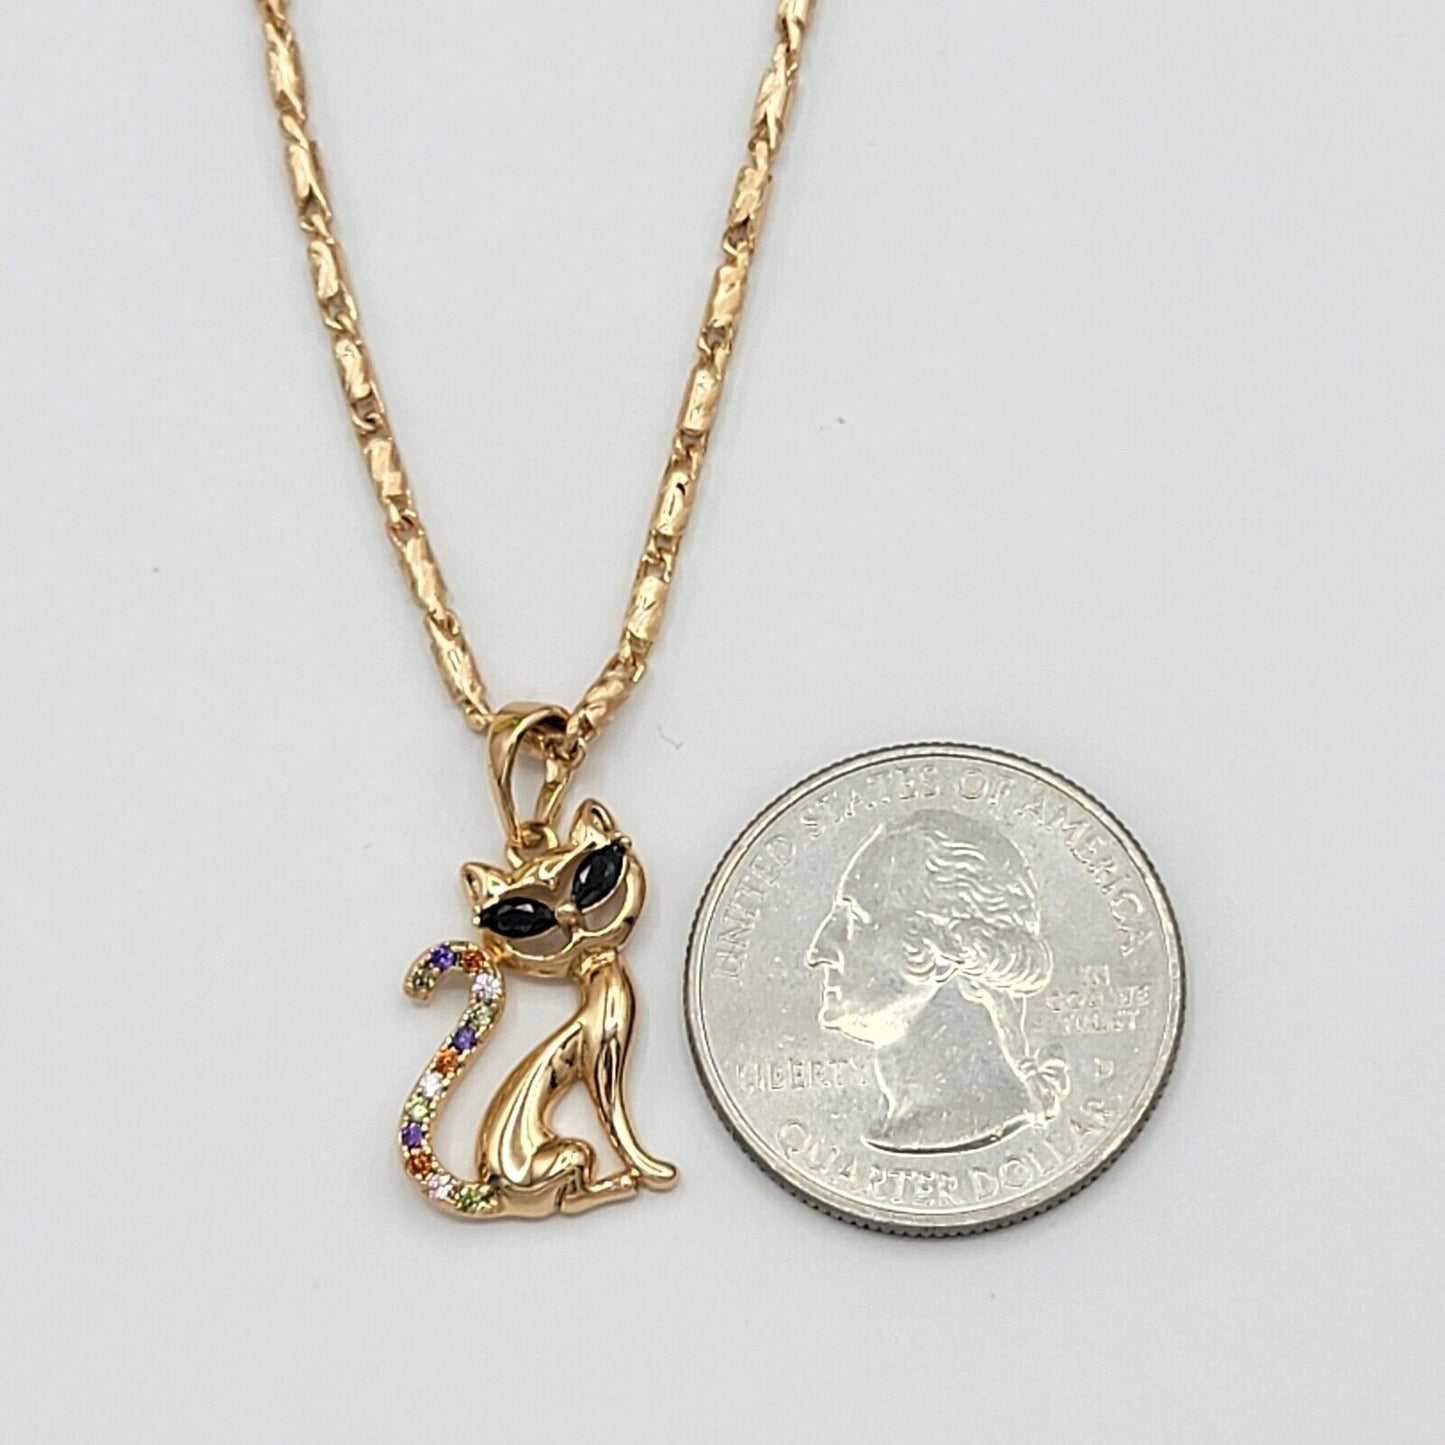 Necklaces - 18K Gold Plated. Kitty Cat Kitten Pendant & Chain.